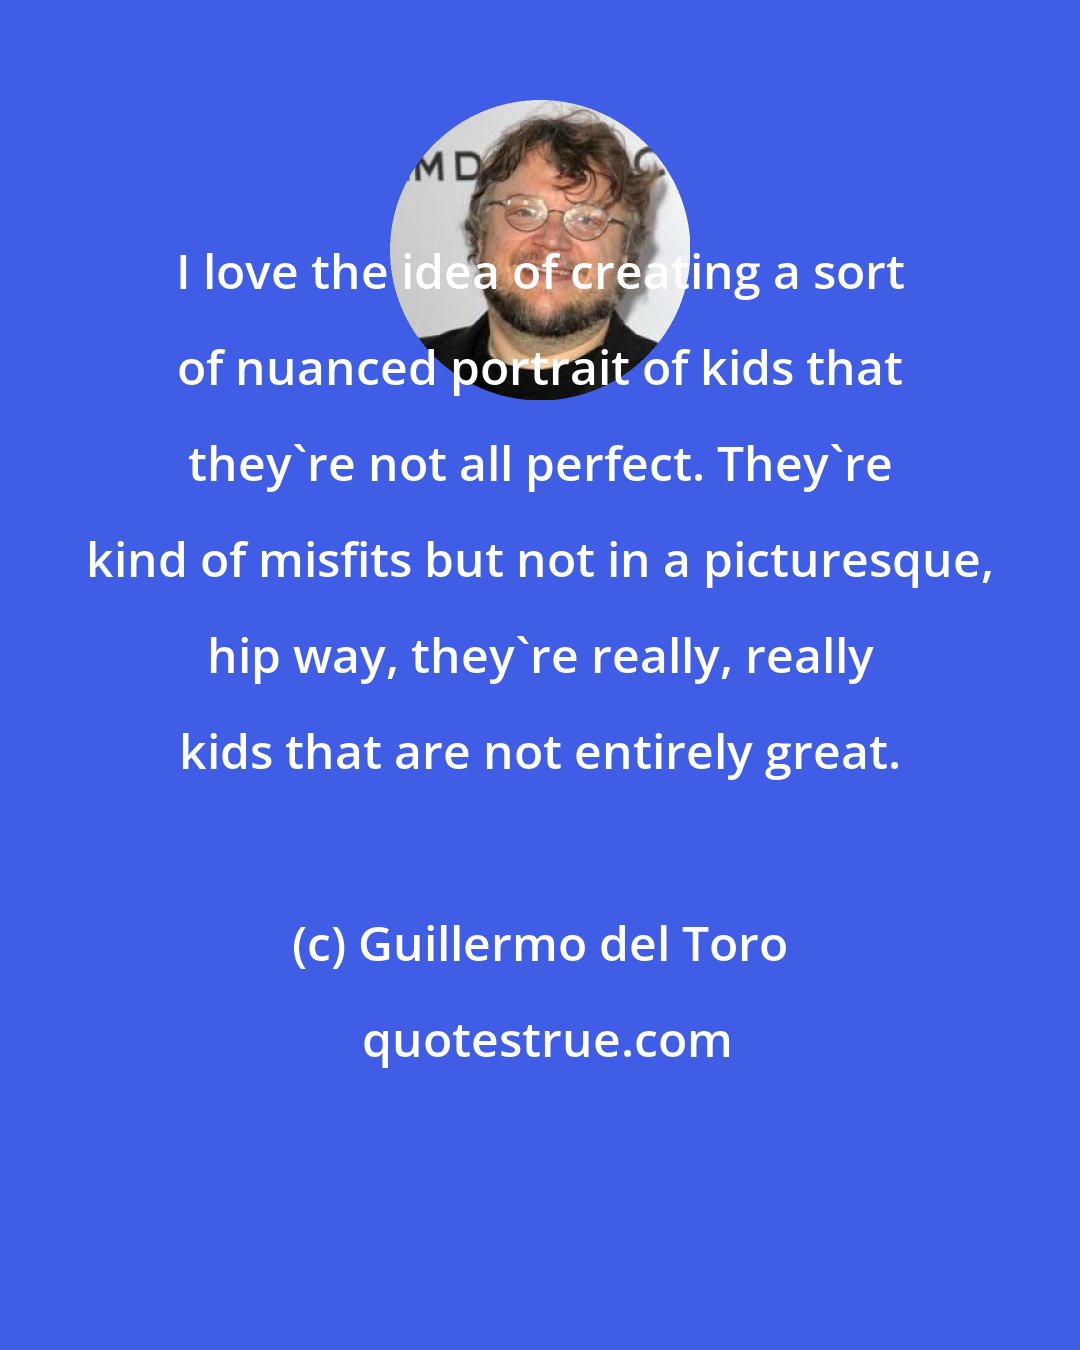 Guillermo del Toro: I love the idea of creating a sort of nuanced portrait of kids that they're not all perfect. They're kind of misfits but not in a picturesque, hip way, they're really, really kids that are not entirely great.